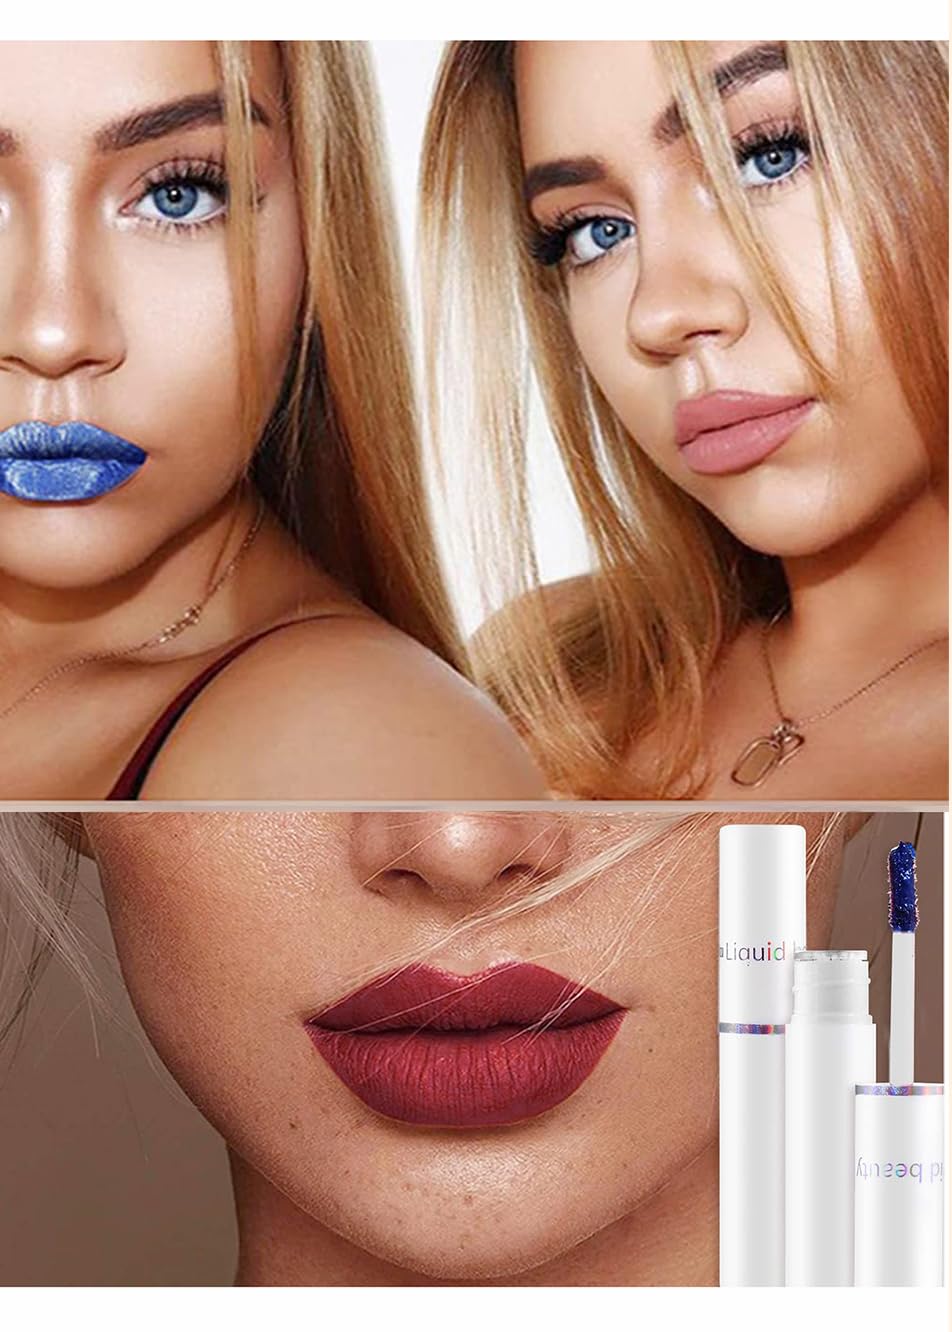 INCREDIBLE Snktiny 2Pcs Peel Off Lip Stain, Lip Stain Peel Off Tattoo Lipstick, Long Lasting Waterproof Liquid Lip Tint Stain, Non-stick Cup Peel Off Lip Tint Makeup for Women Girls